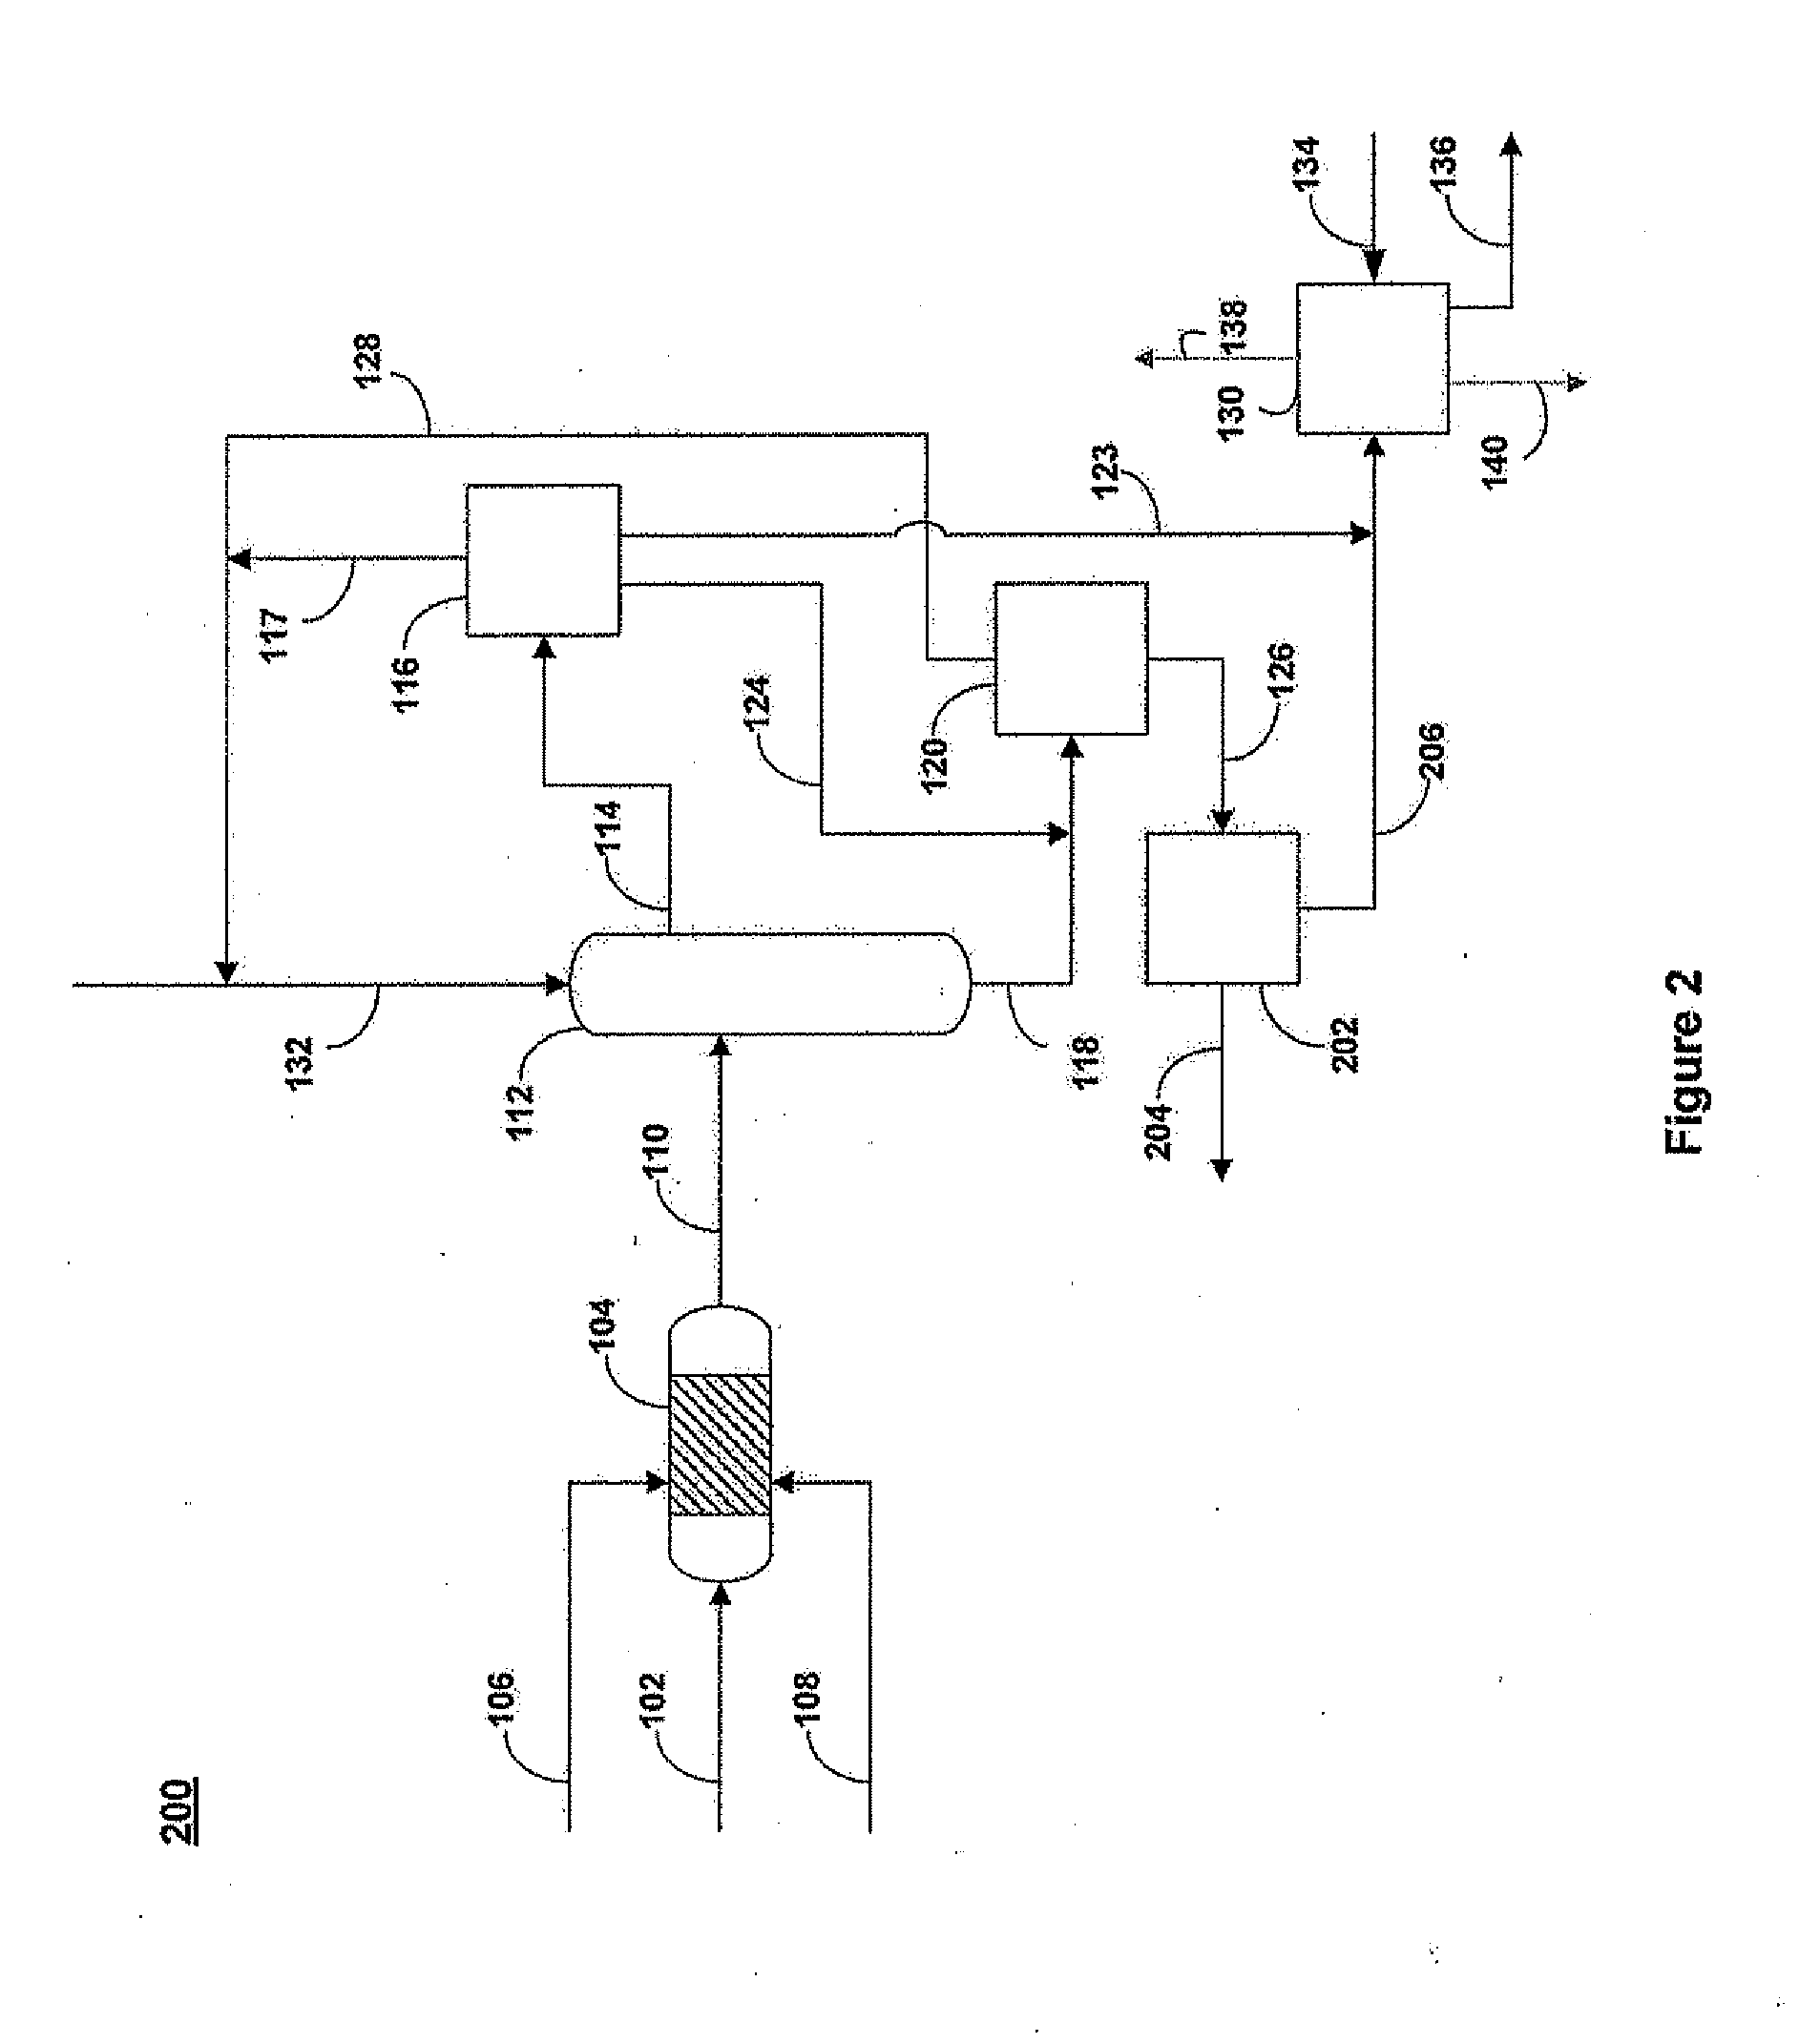 Process for Oxidative Desulfurization and Denitrogenation Using A Fluid Catalytic Cracking (FCC) Unit